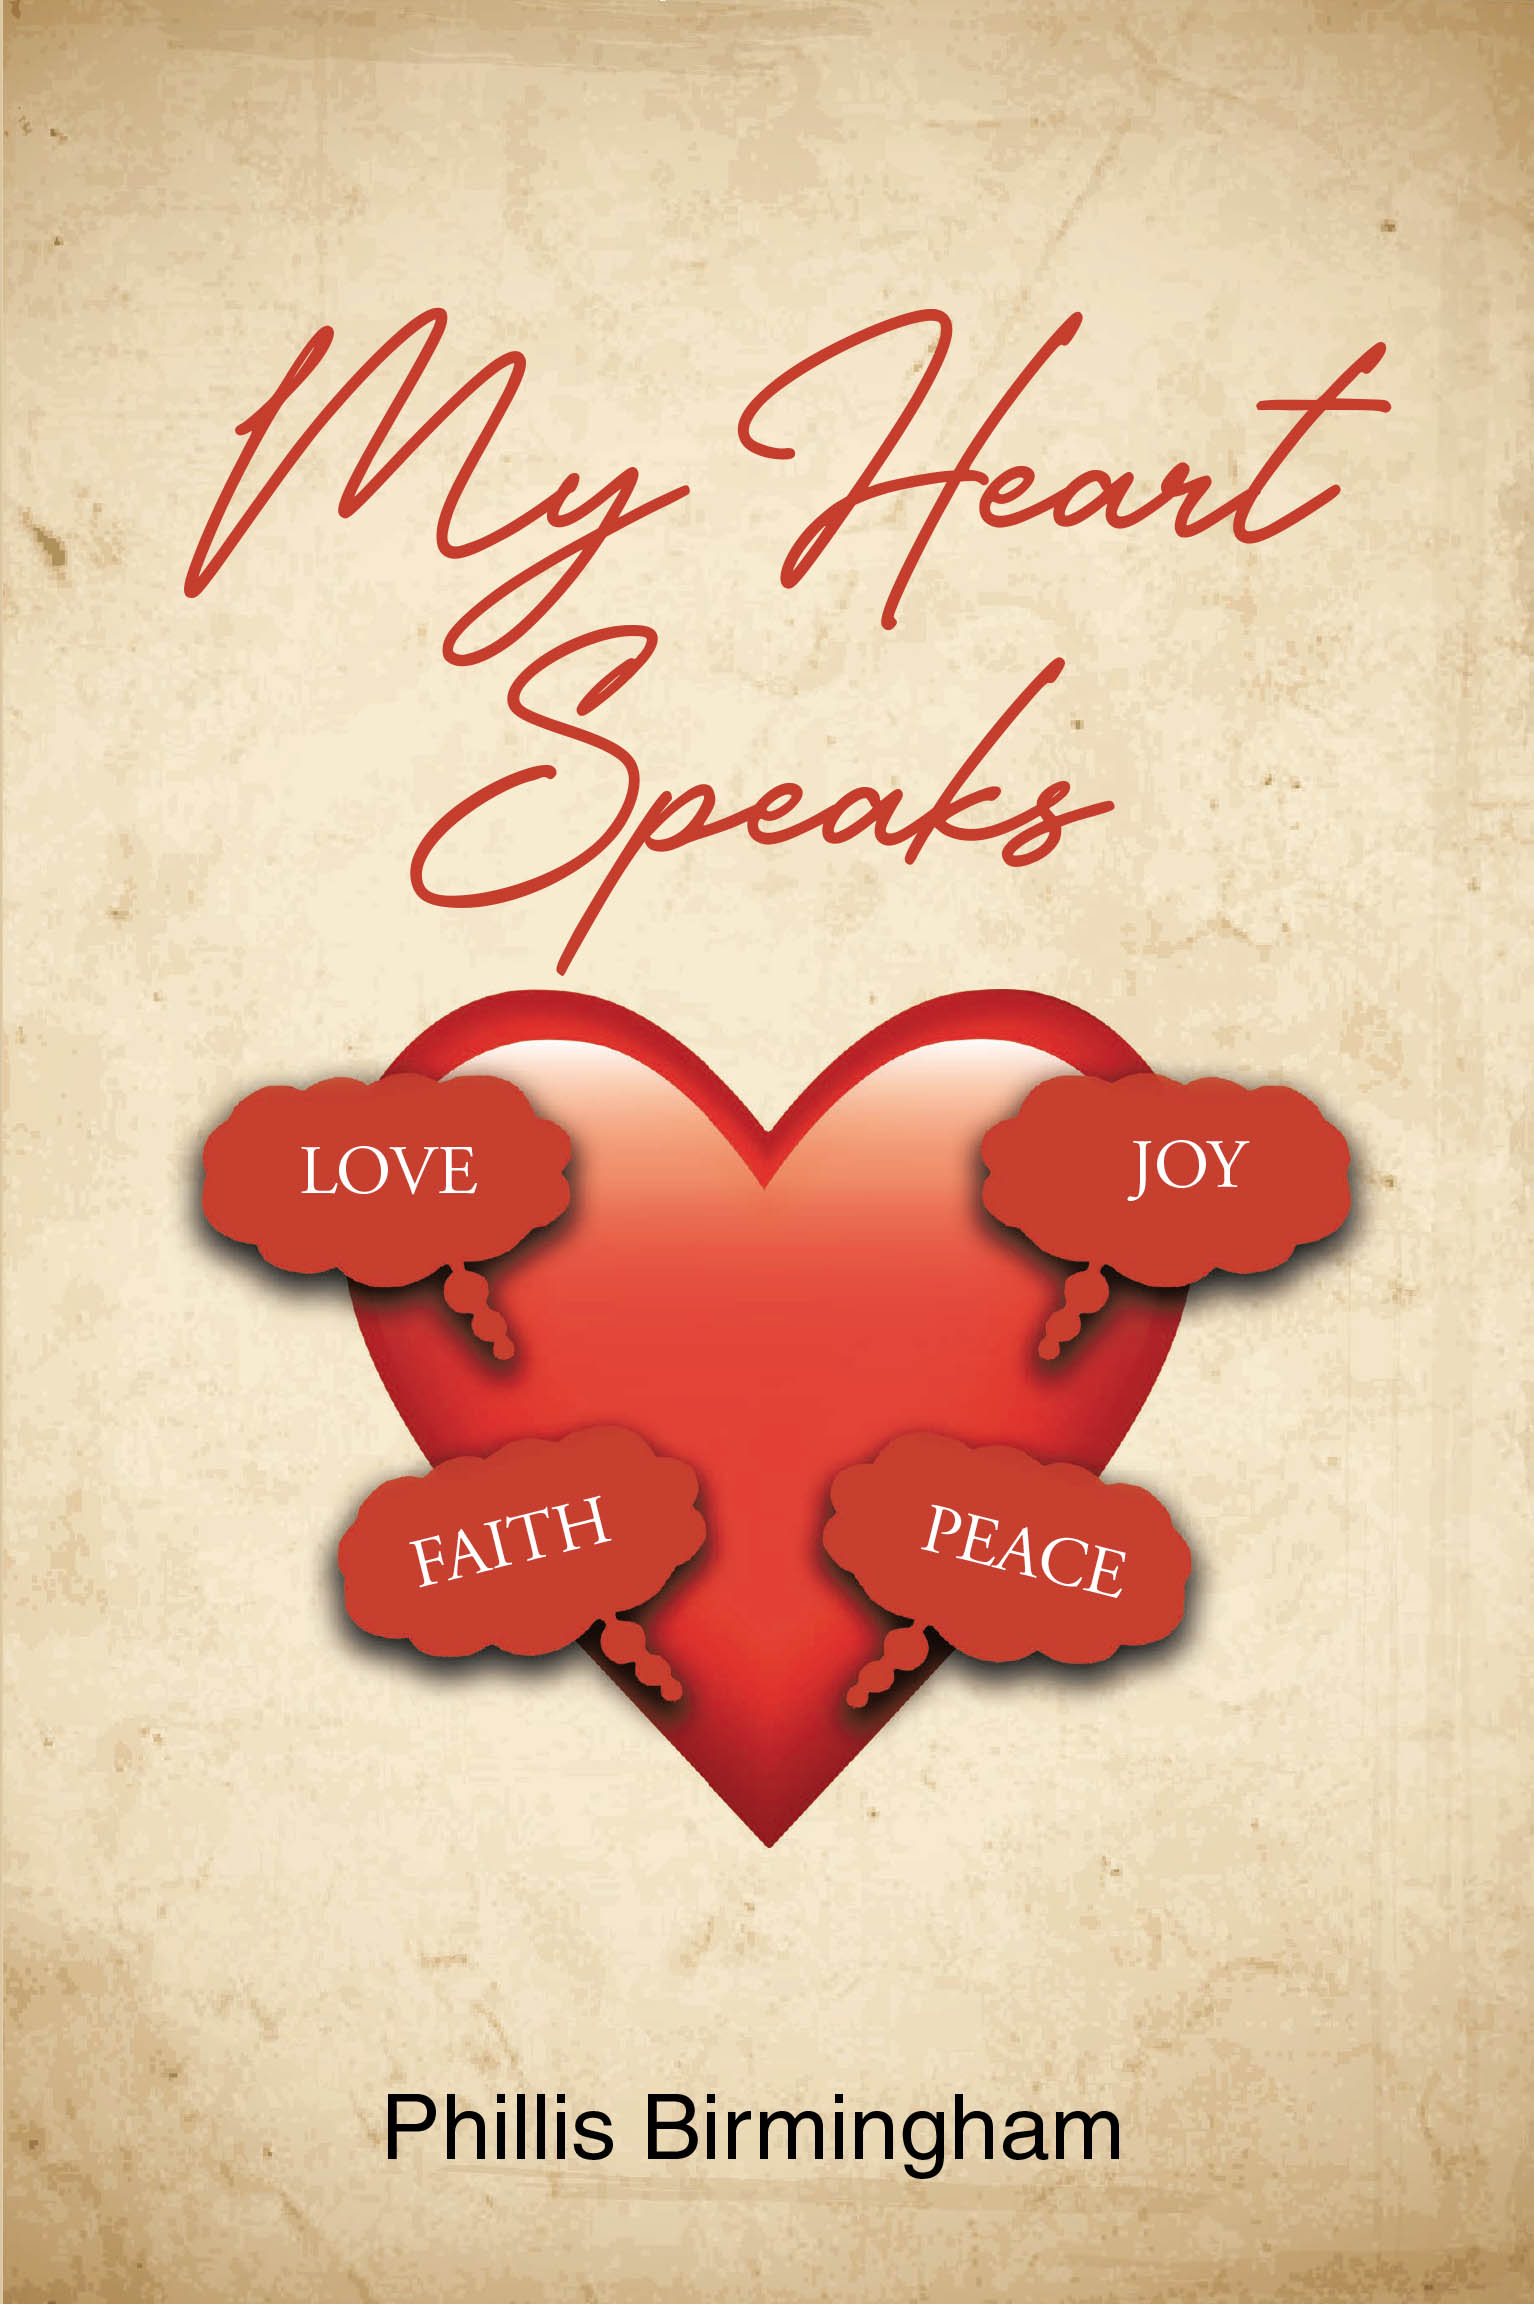 Phillis Birmingham’s Newly Released "My Heart Speaks" is an Uplifting Collection of Poetry and Insightful Prayers